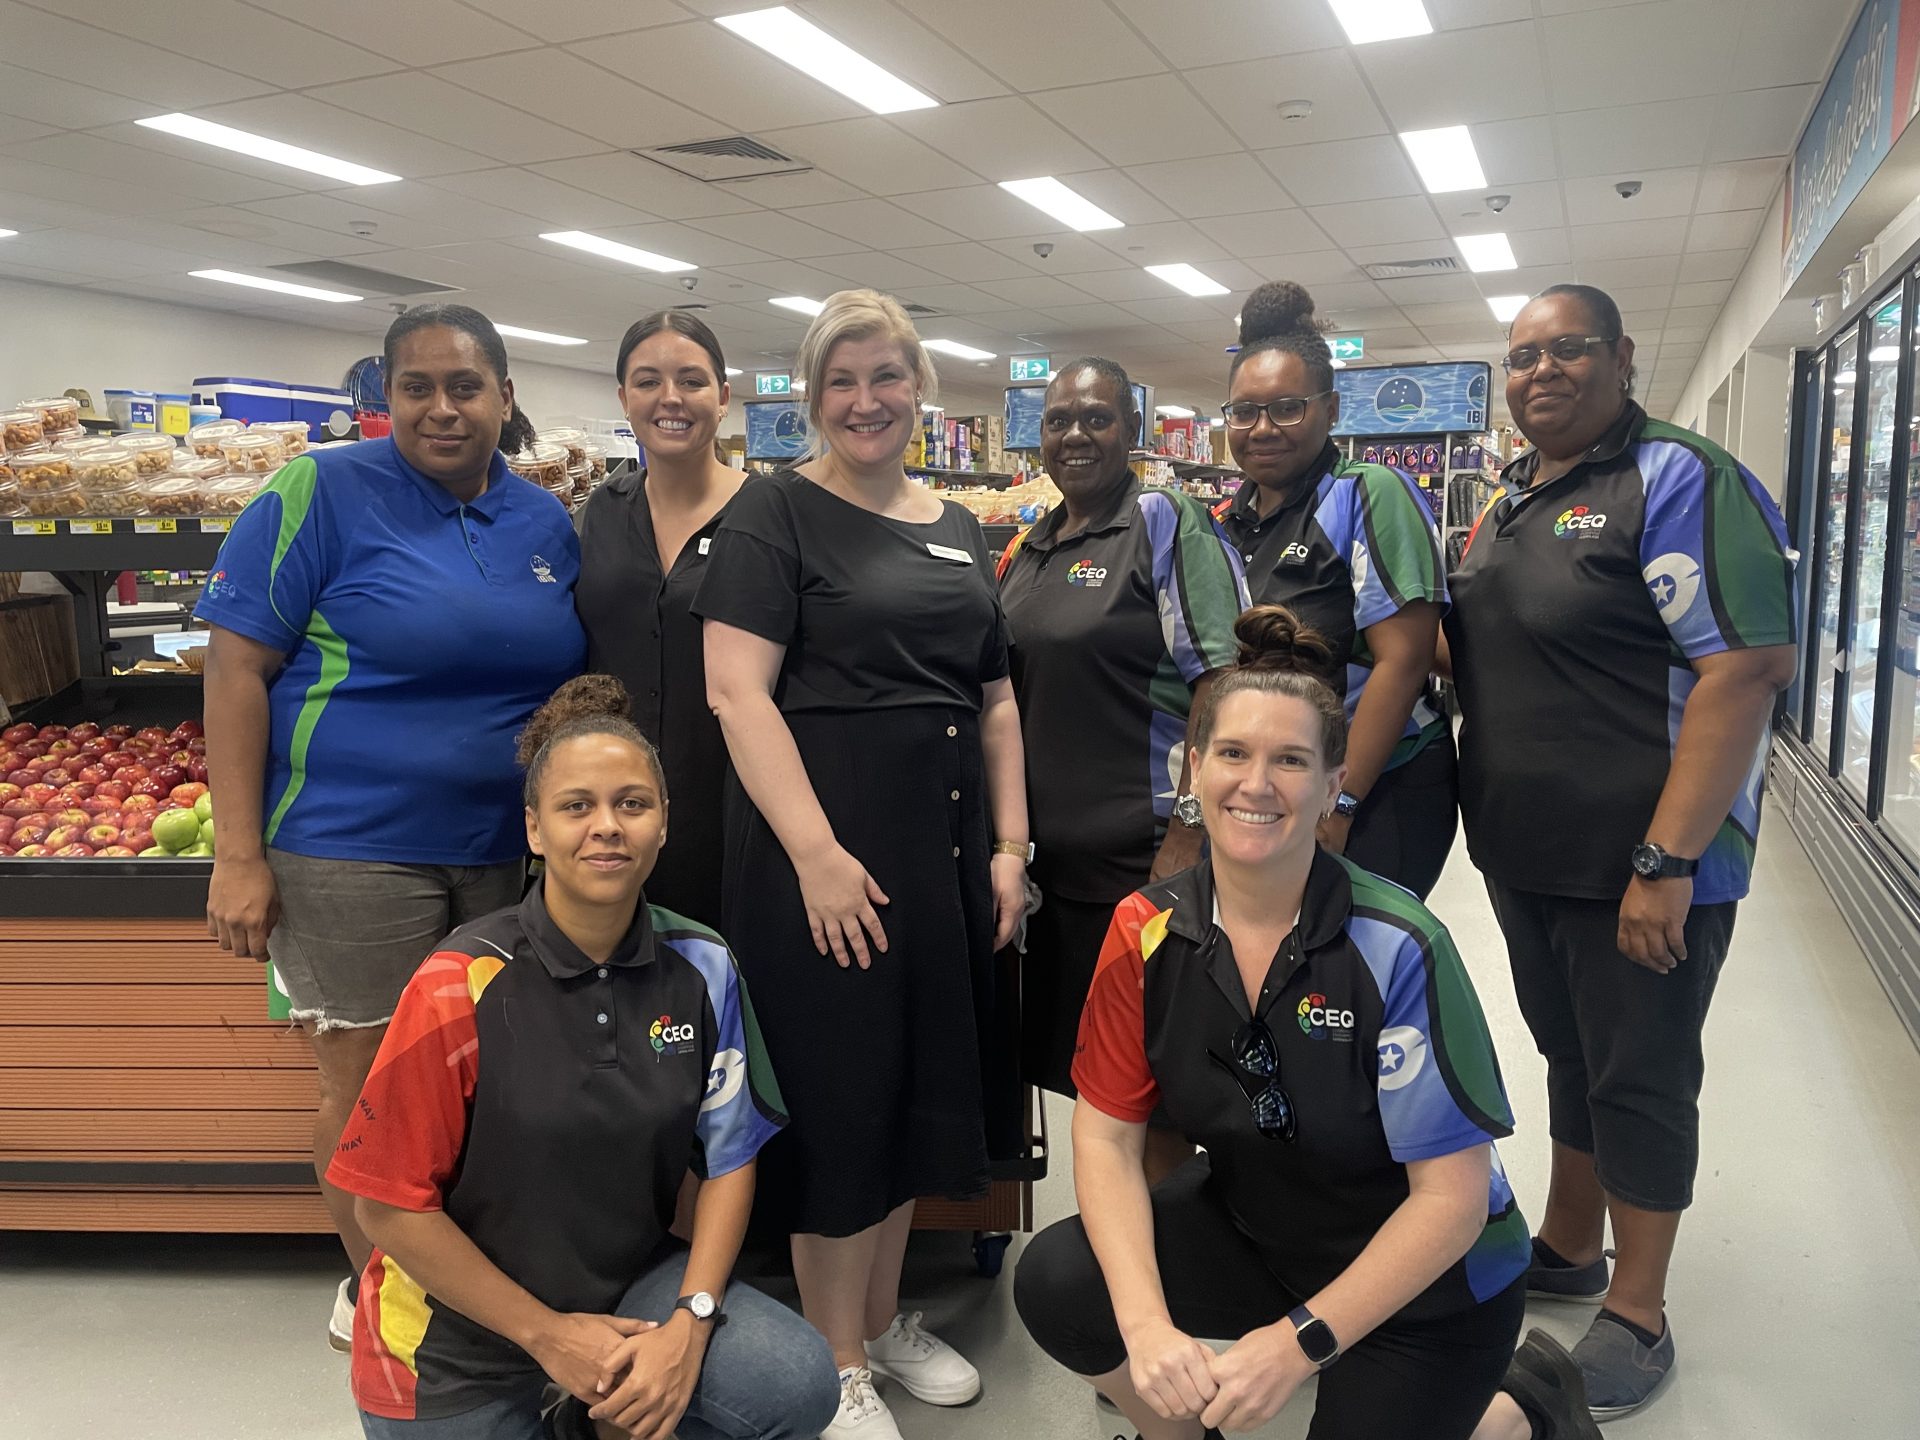 New agreement brings Woolworths products to Community Enterprise Queensland’s remote stores